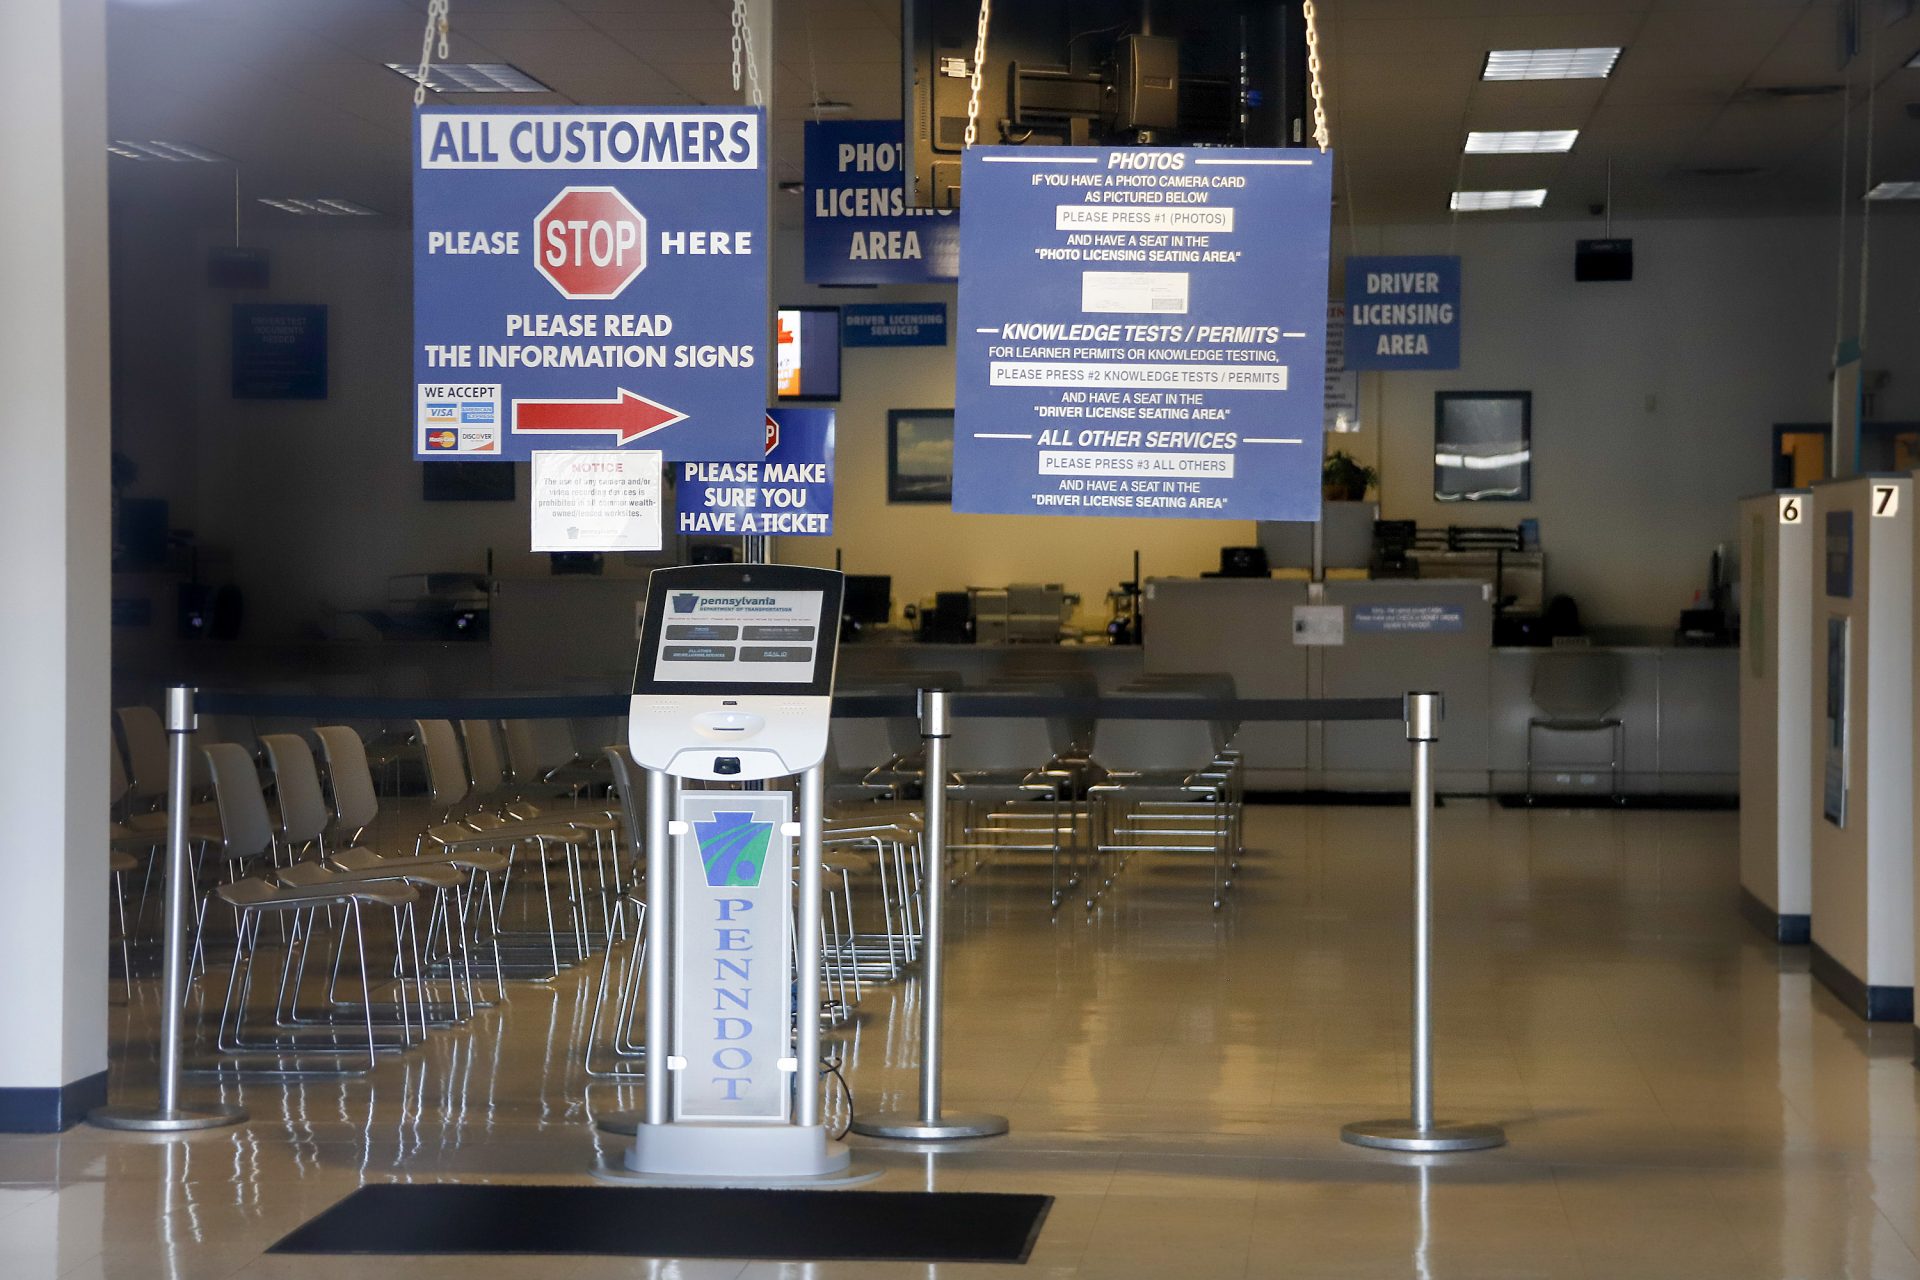 The seats and aisles are empty as seen through the window of the closed Penndot Drivers License Center in Butler, Pa., Friday, April 3, 2020. Pennsylvania will stop paying about 9,000 state workers whose offices have been closed as a result of the coronavirus pandemic, officials said Friday. The pay freeze affects about 12% of the state workforce, though individual agencies were hit much harder, with the state departments of Transportation and Revenue halting pay to more than half their employees.